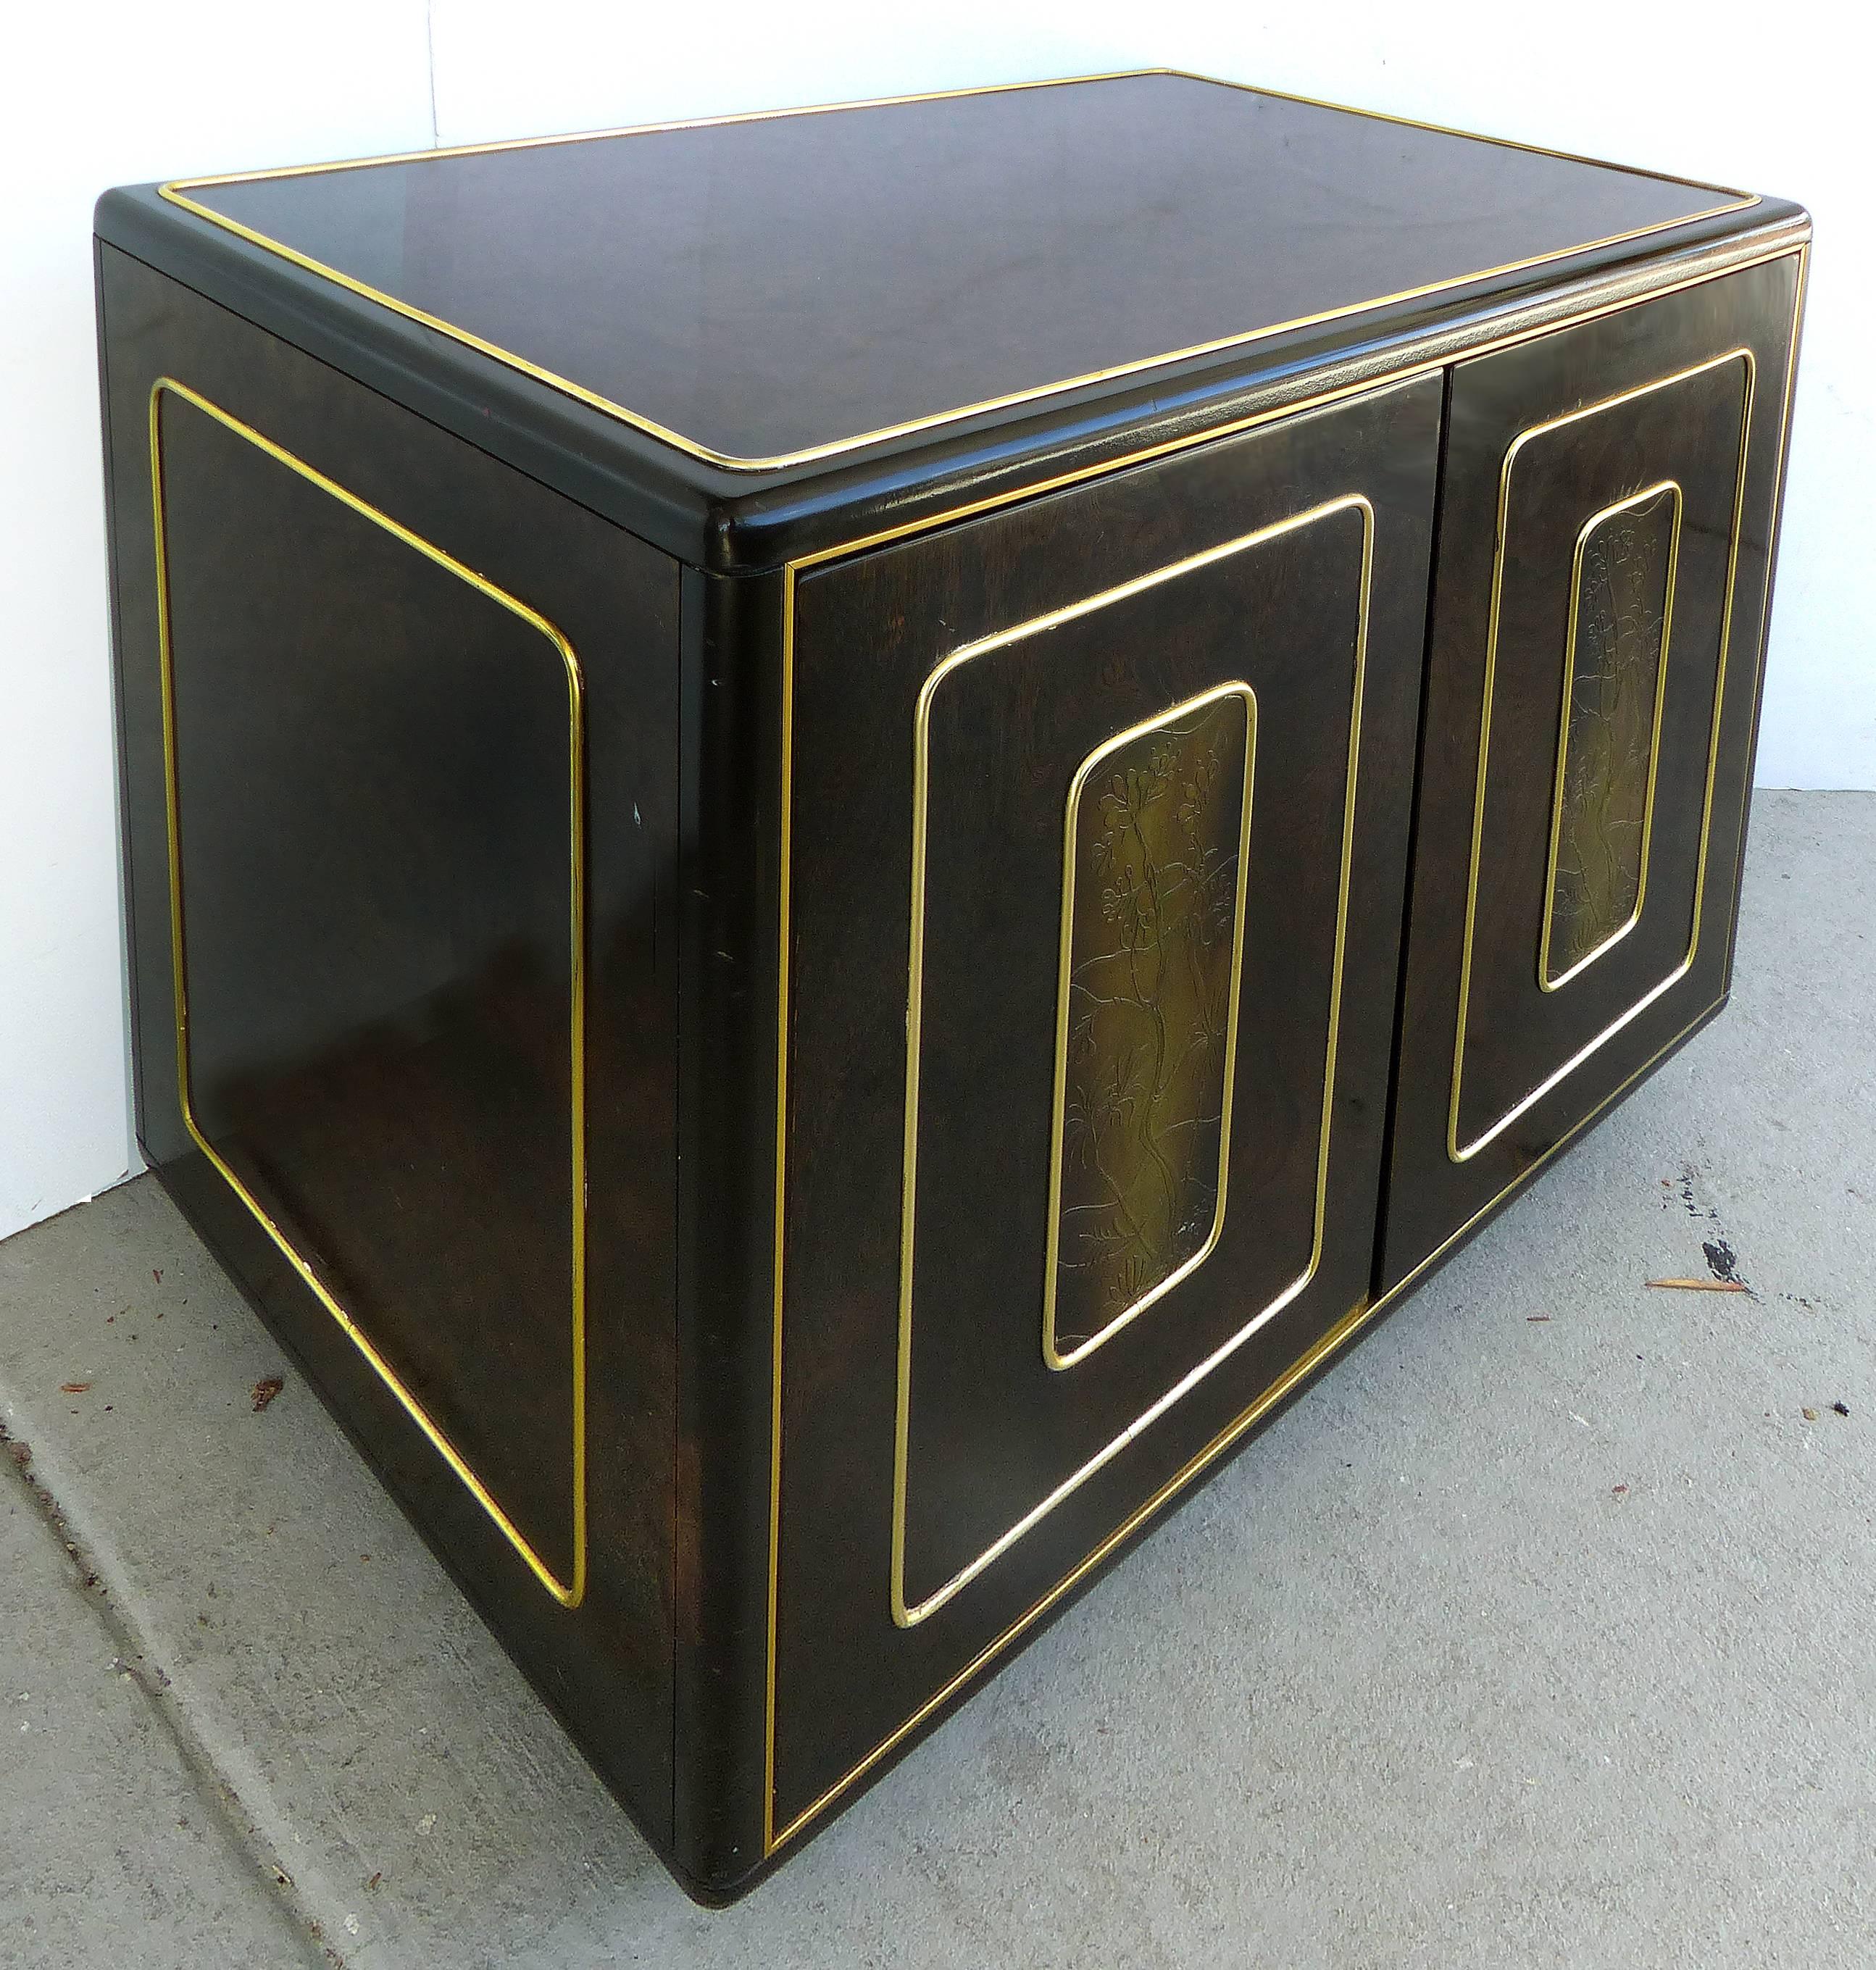 A pair of Mid-Century Modern Romweber burl wood nightstands with inset etched brass panels and brass trim. The etched panels have an Asian inspired floral motif. Each has a pair of touch-latch doors which open to reveal ample storage with removable